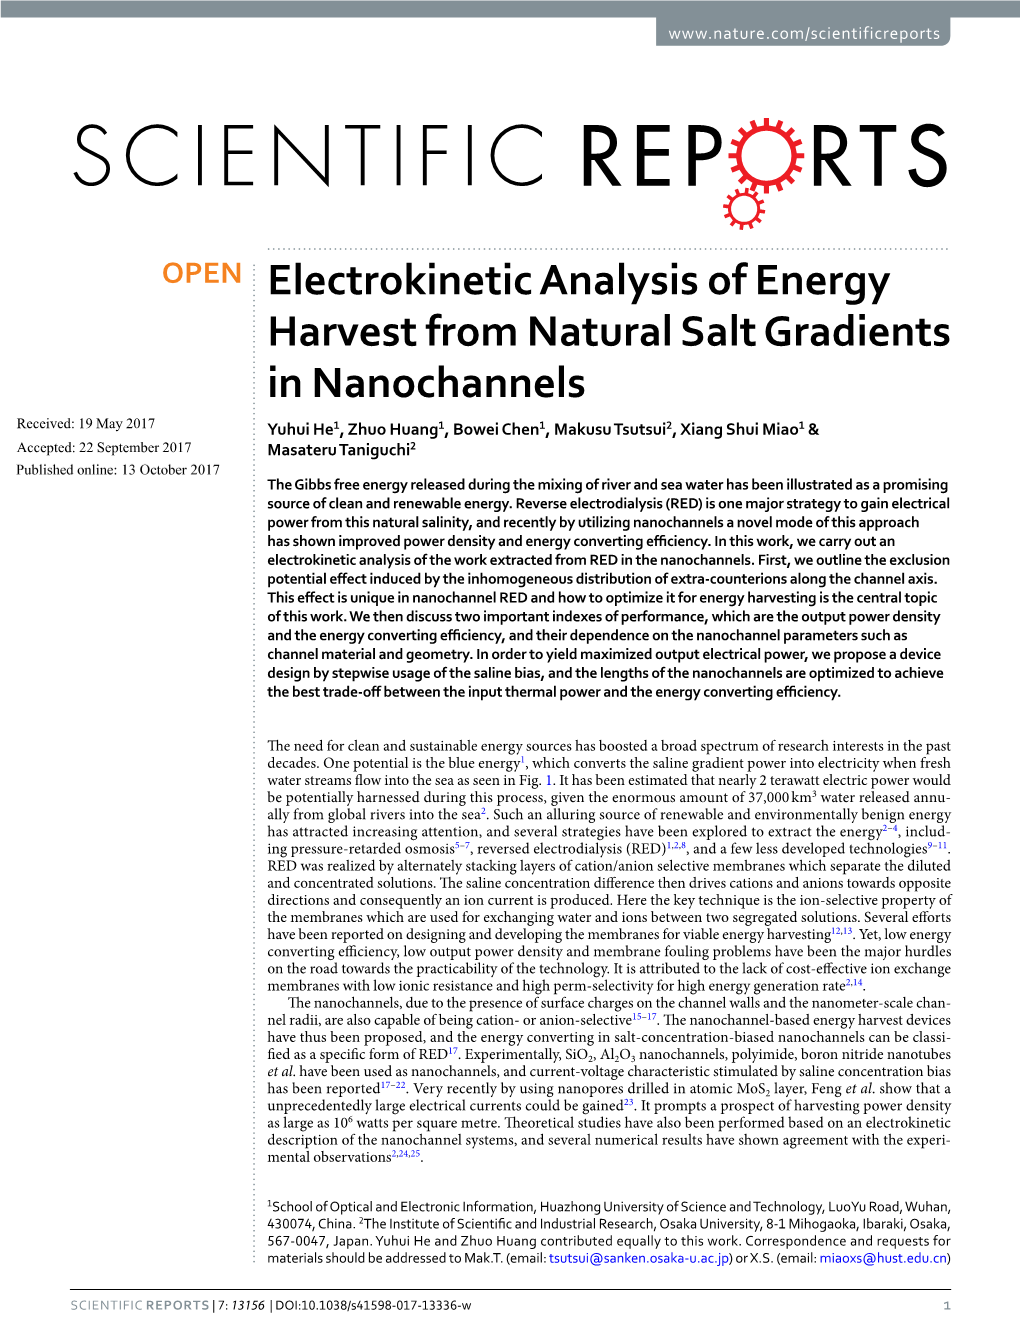 Electrokinetic Analysis of Energy Harvest from Natural Salt Gradients in Nanochannels